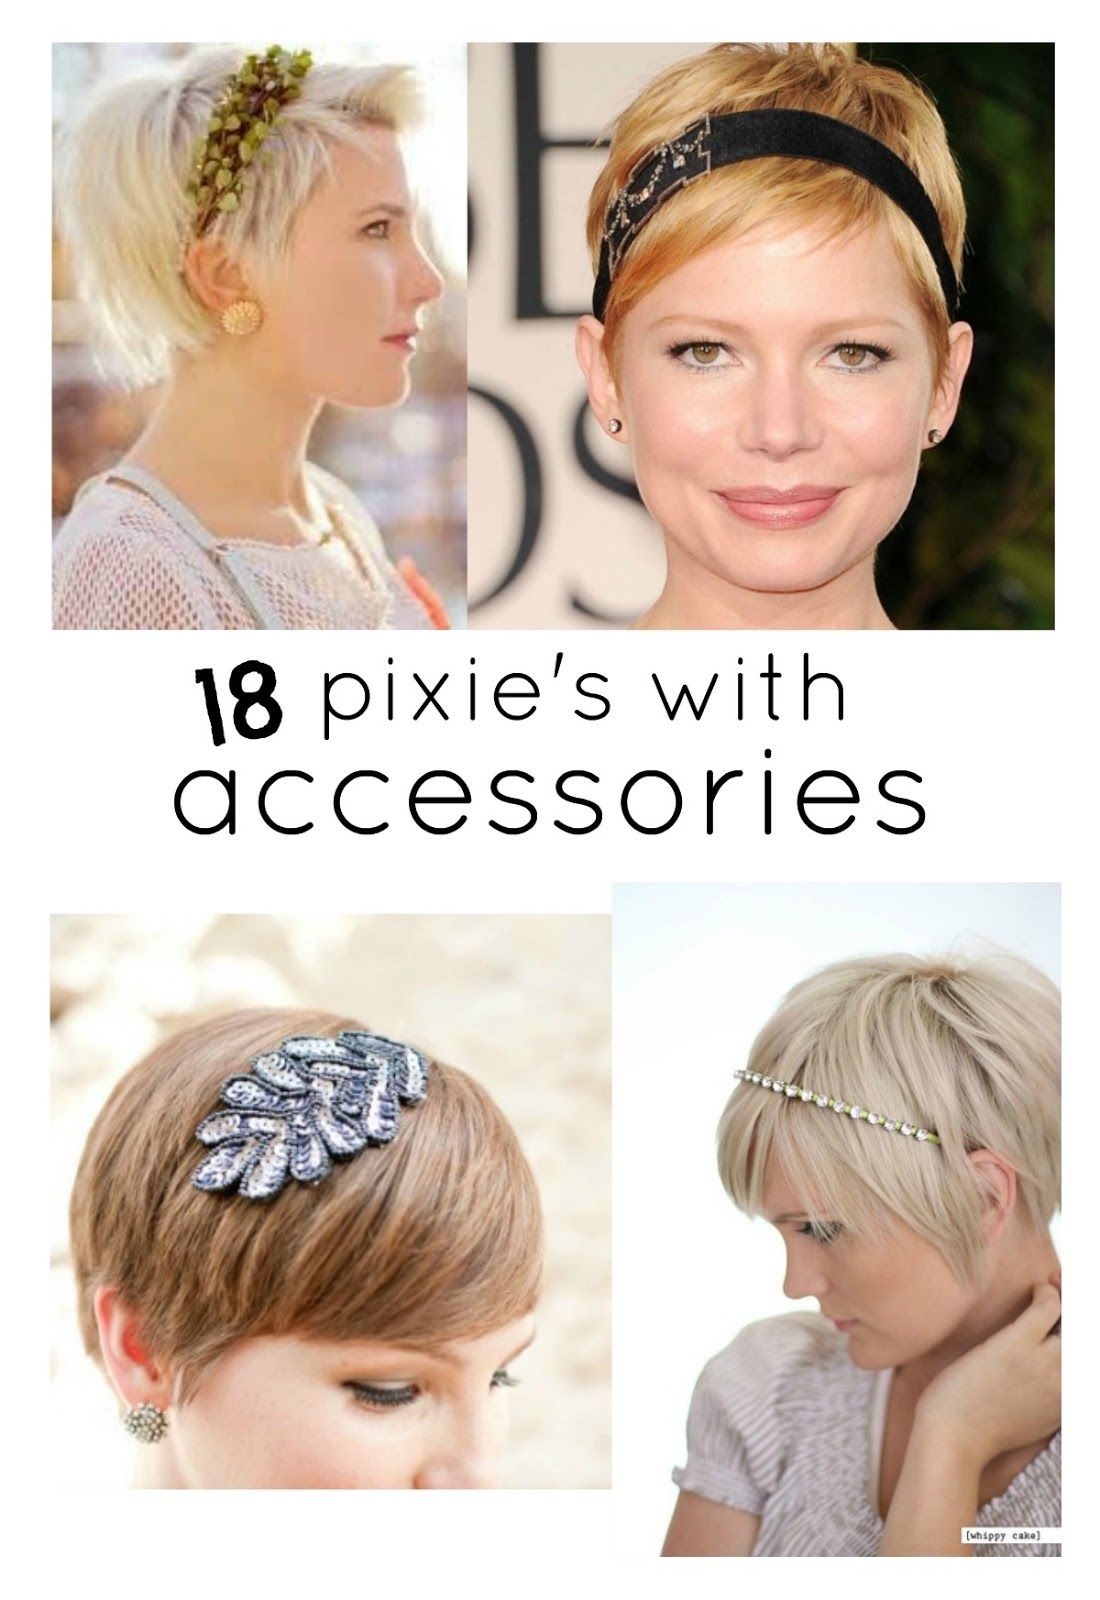 Pin On My Style throughout Where To Buy Hair Accessories For Pixie Haircuts